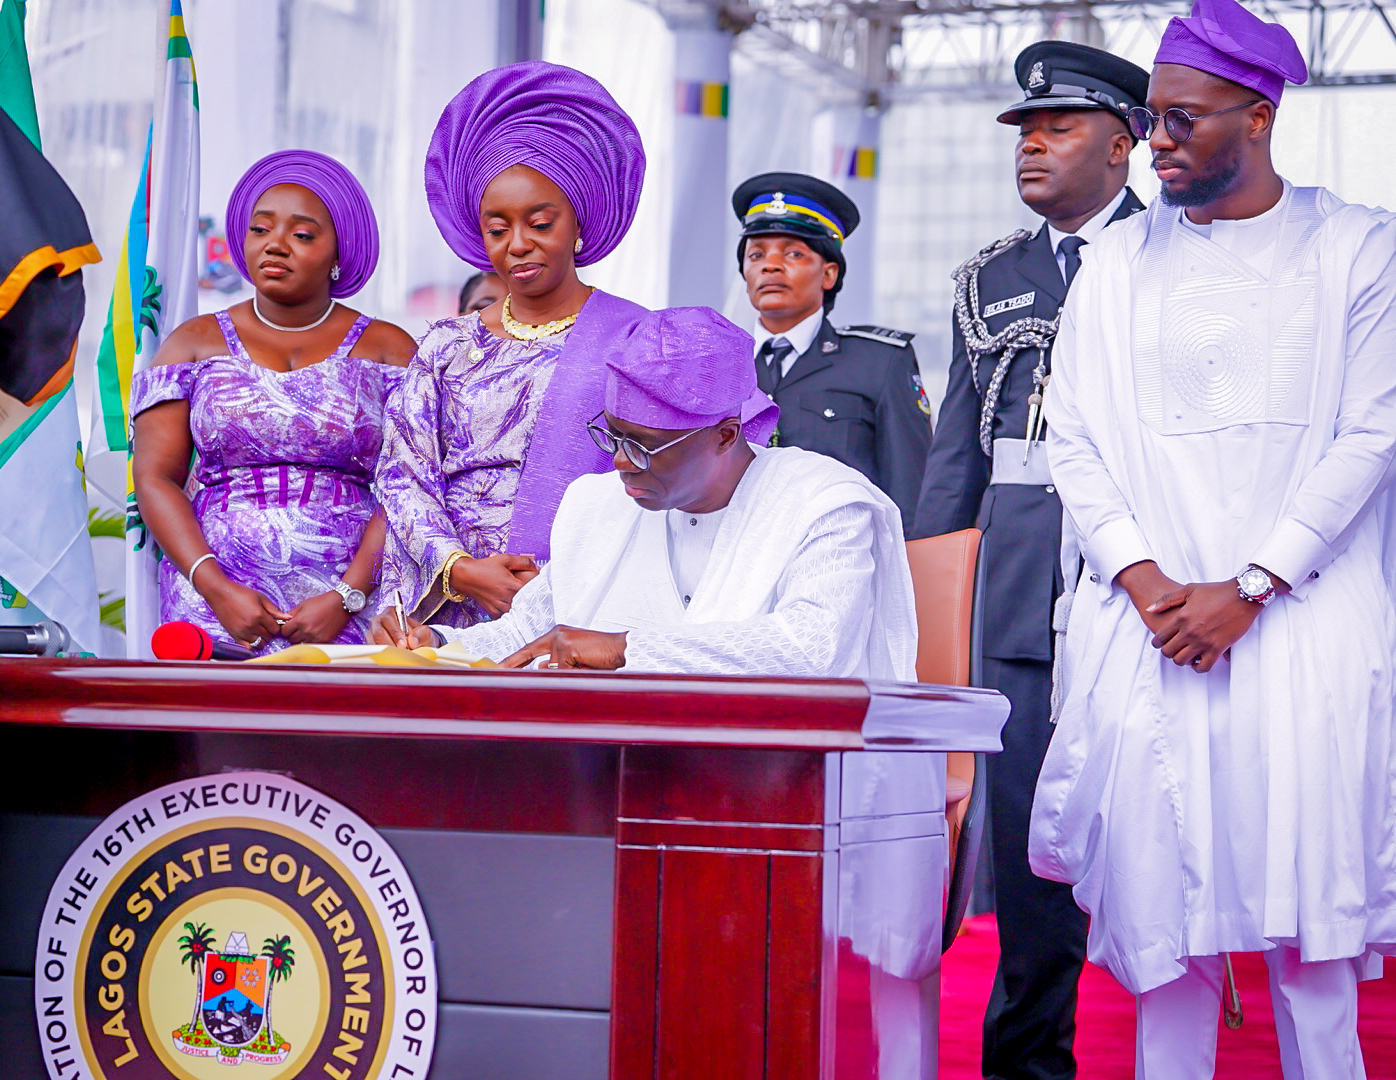 GOVERNOR OF LAGOS STATE, MR BABAJIDE SANWO-OLU  SWORN IN FOR SECOND TERM IN OFFICE AT THE INAUGURATION CEREMONY,  TAFAWA BALEWA SQUARE, LAGOS